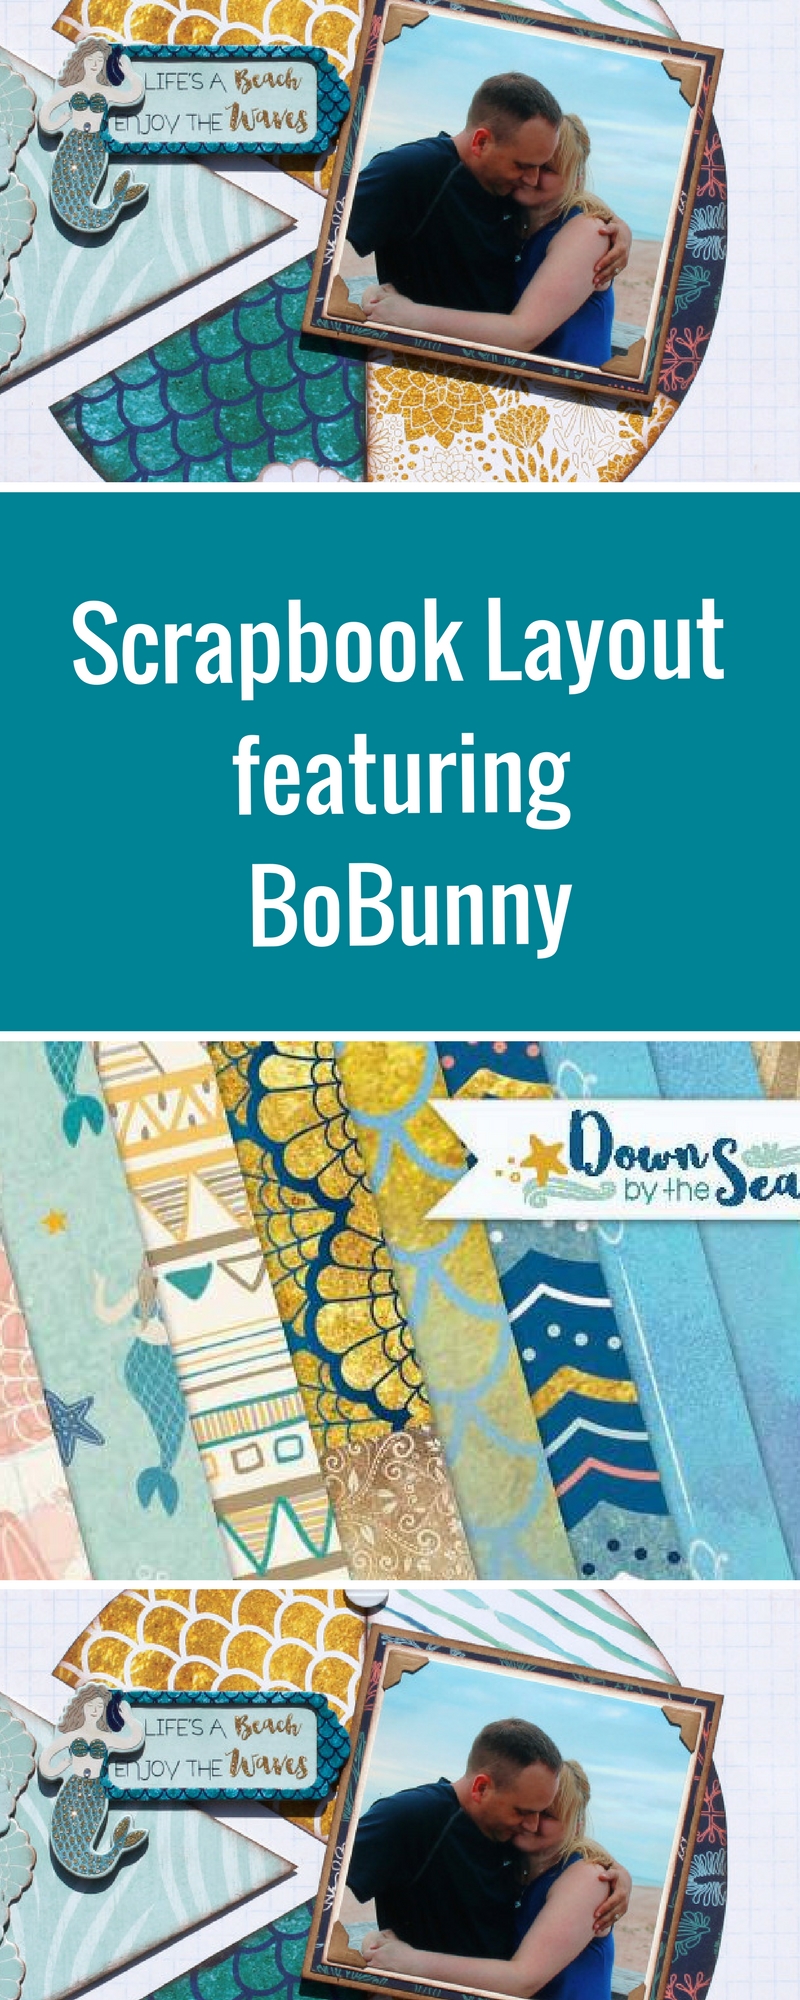 Scrabook Layout Based on a Sketch | Featuring BoBunny Down by the Sea Collection | Designed by Tracy McLennon | Creative Scrapbooker Magzine